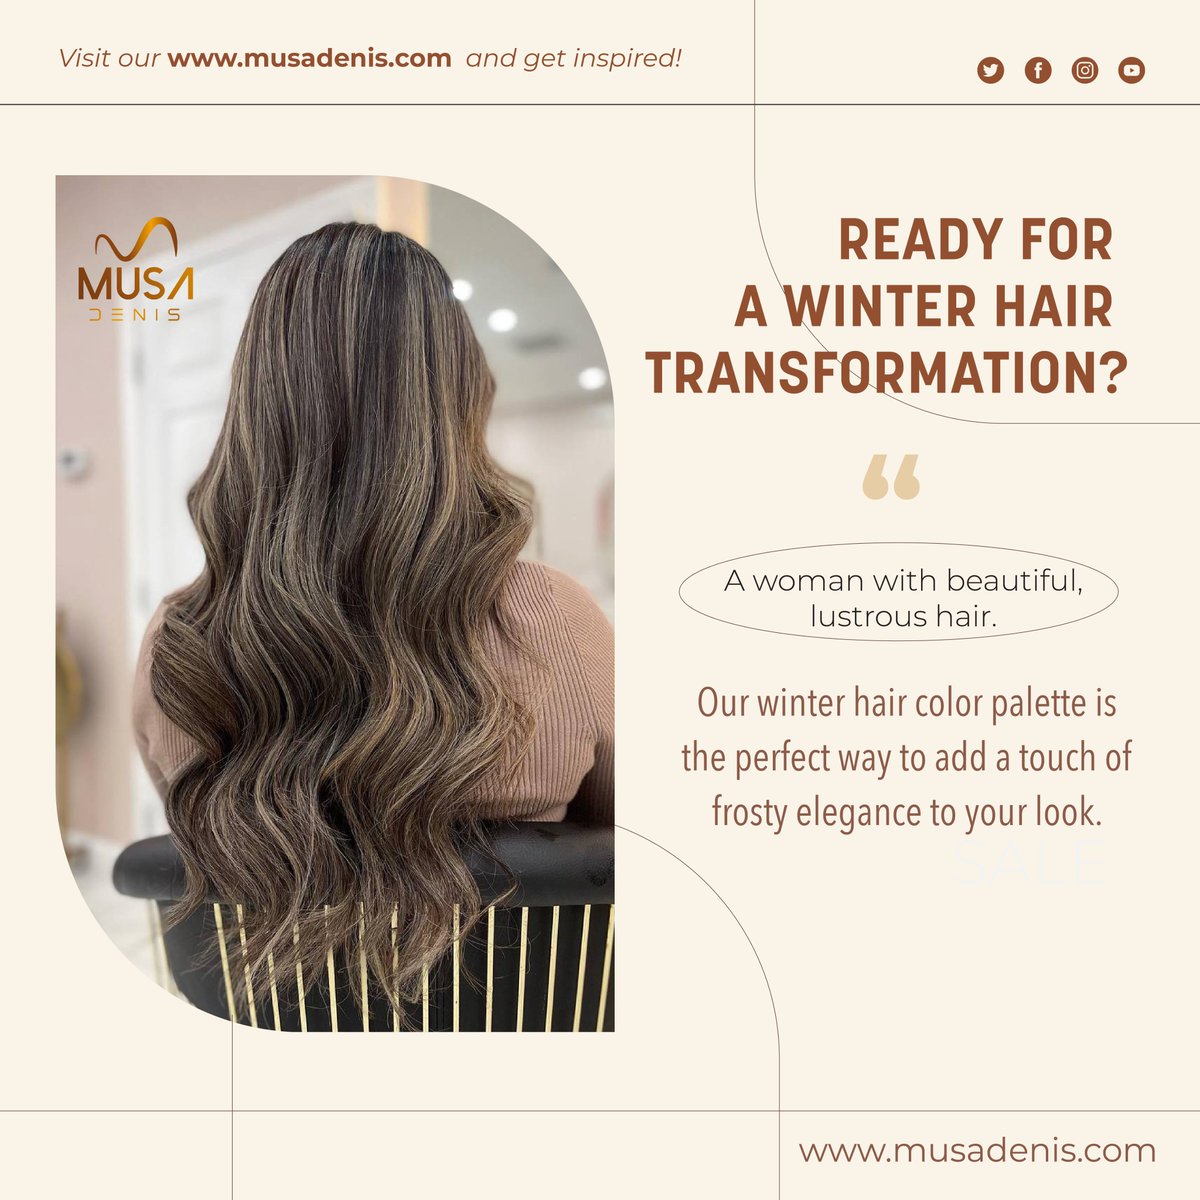 Ready for a winter hair transformation?

Our winter hair color palette is the perfect way to add a touch of frosty elegance to your look. 

#VirginiaPolitics #VirginiaNews #VirginiaSports #VirginiaFood #VirginiaCulture #Virginiahair